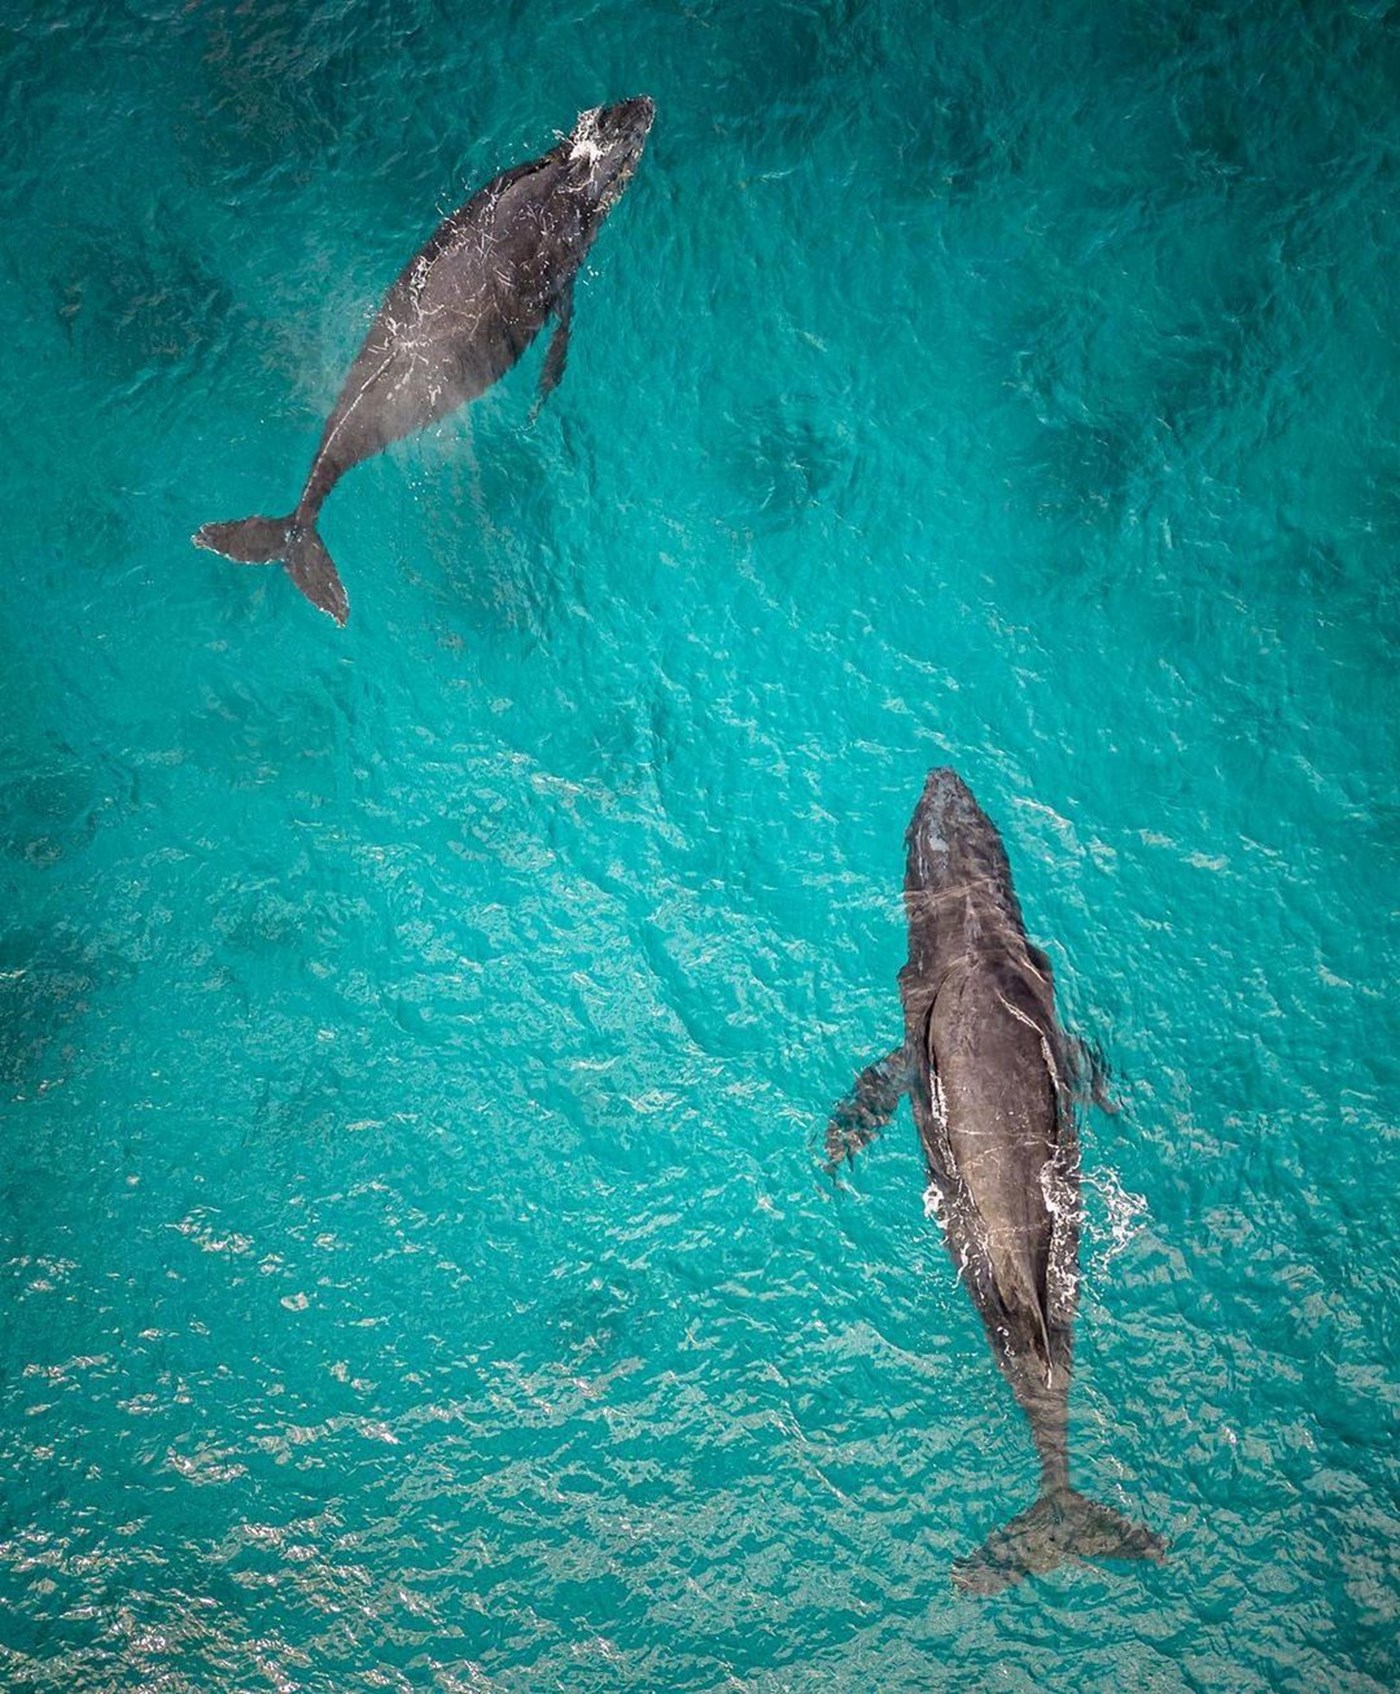 Whales in Albany (Image Credit: Australia's South West)